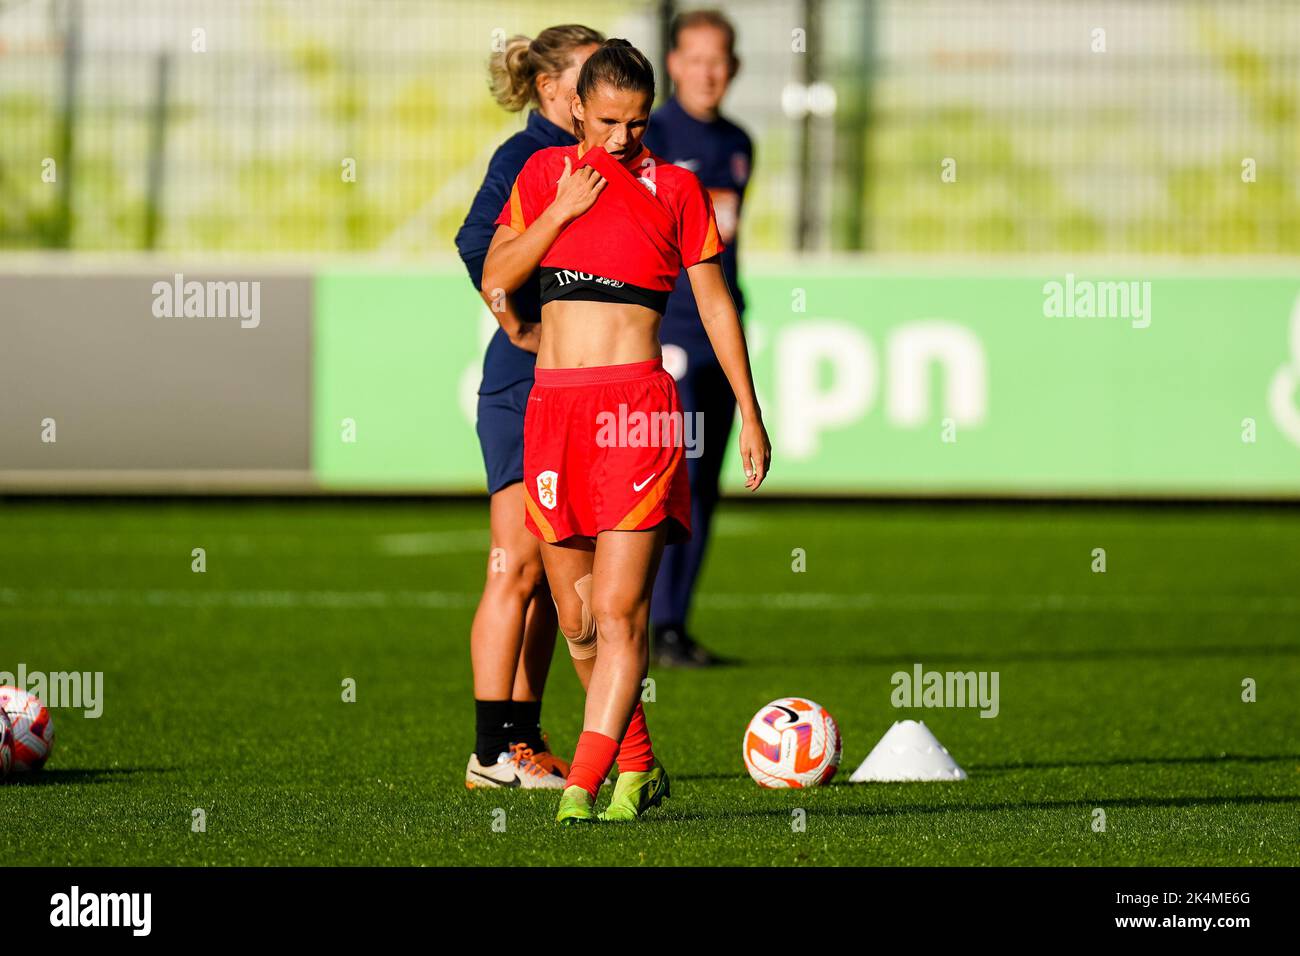 ZEIST, NETHERLANDS - OCTOBER 3: Kerstin Casparij of the Netherlands during a Training Session of the Netherlands Women’s Football Team at the KNVB Campus on October 3, 2022 in Zeist, Netherlands (Photo by Joris Verwijst/Orange Pictures) Stock Photo